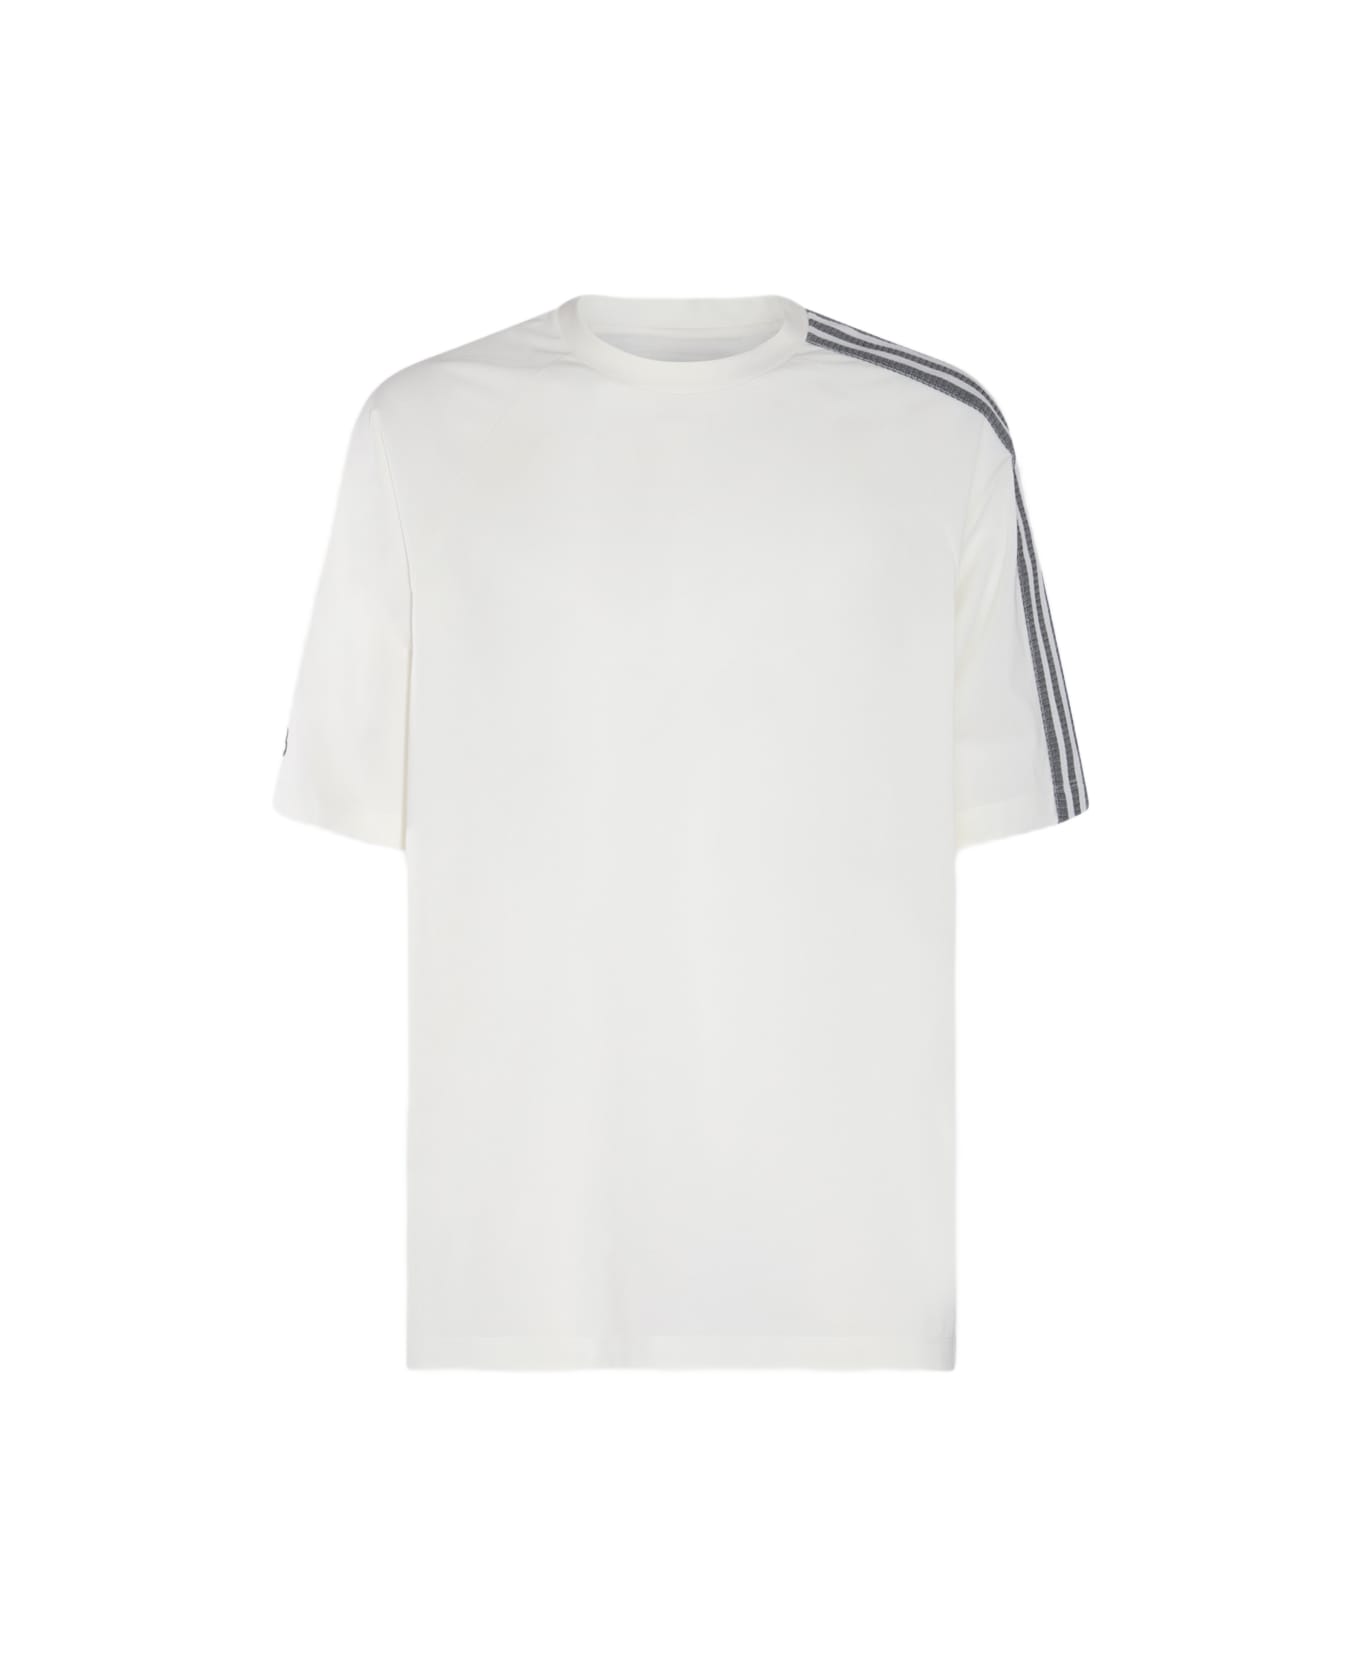 Y-3 White And Grey Cotton T-shirt - Beige Tシャツ